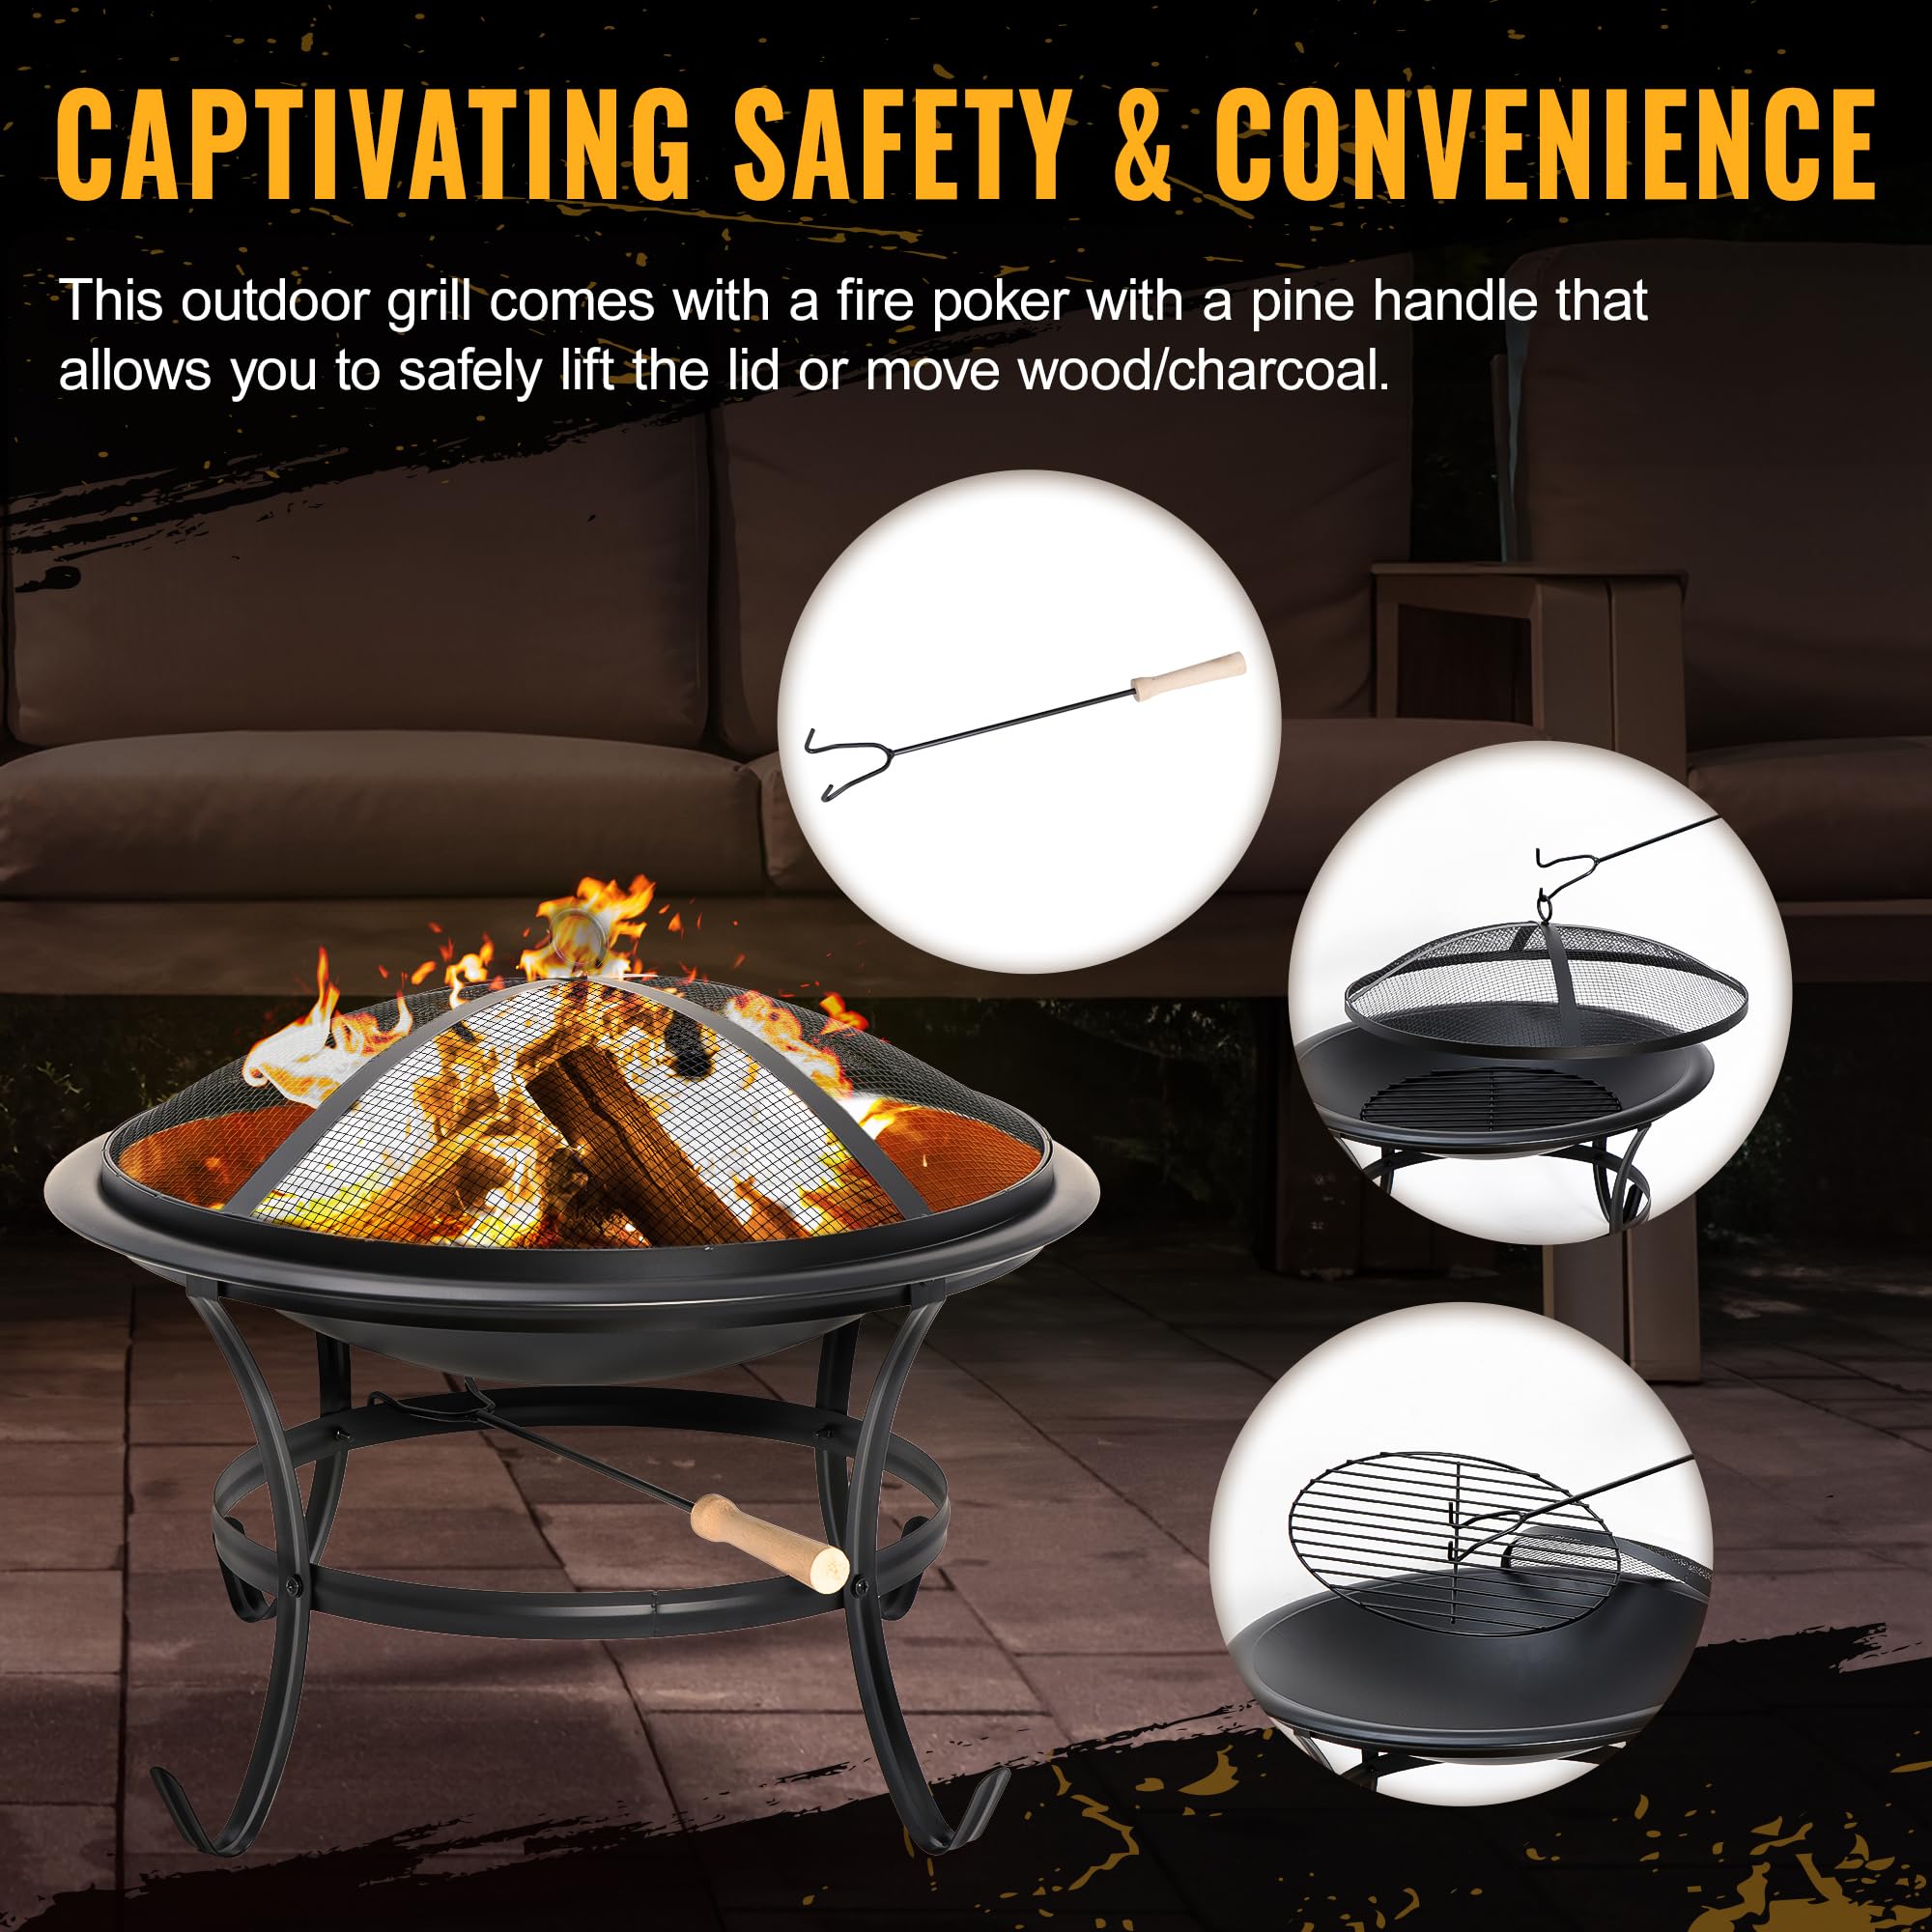 LEMY 22 Inch Outdoor Firepit Wood Burning BBQ Grill Steel Firepit Bowl for Patio Backyard Garden Camping Picnic Bonfire w/Spark Screen Cover, Log Grate, Fire Poker